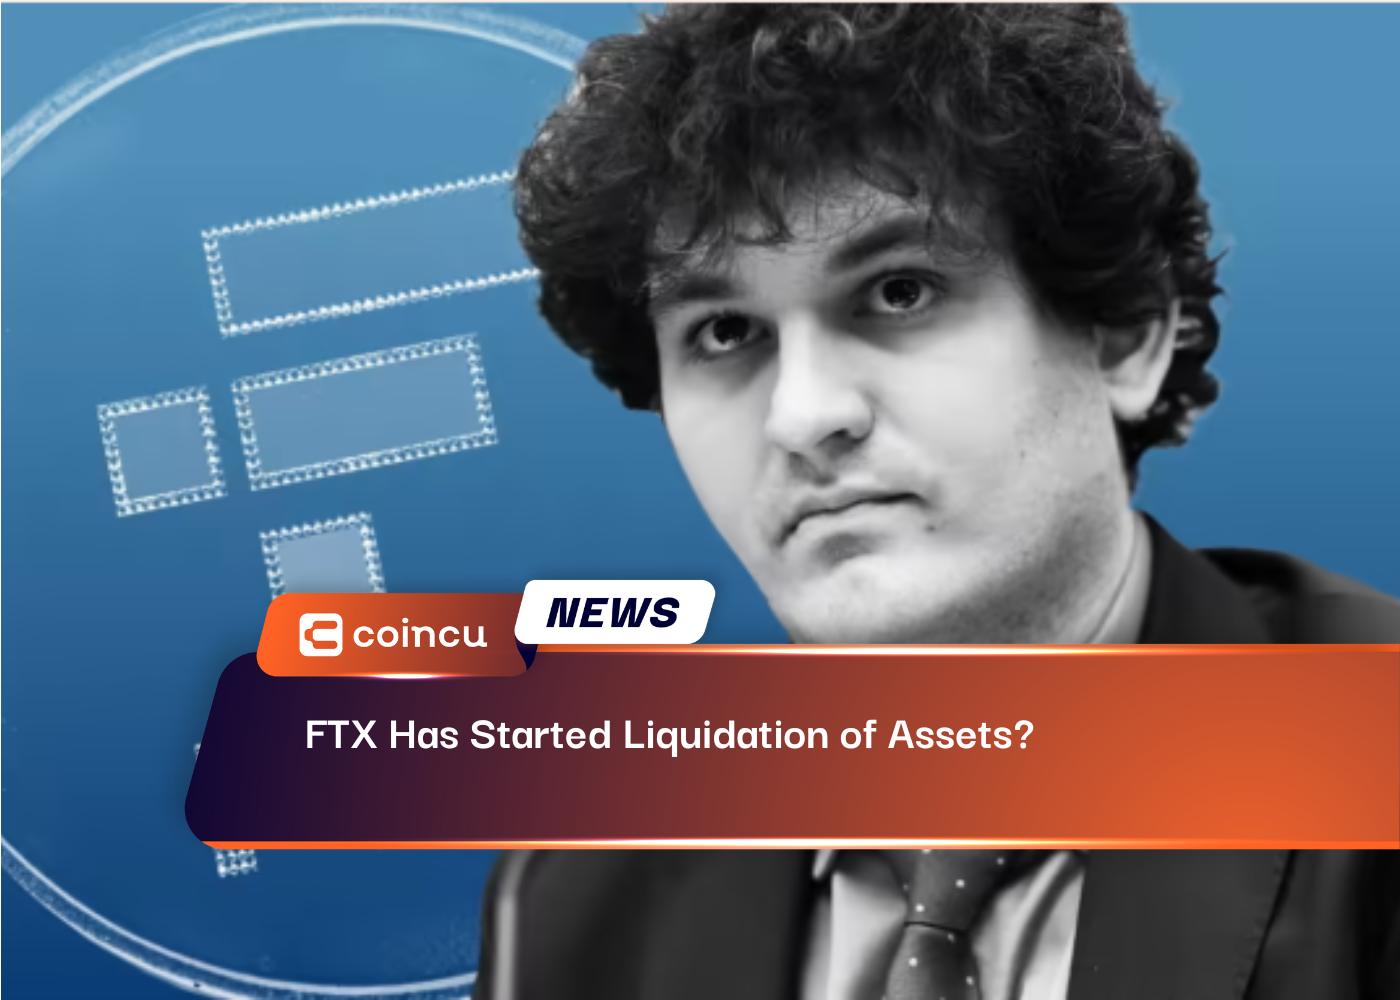 FTX Has Started Liquidation of Assets?